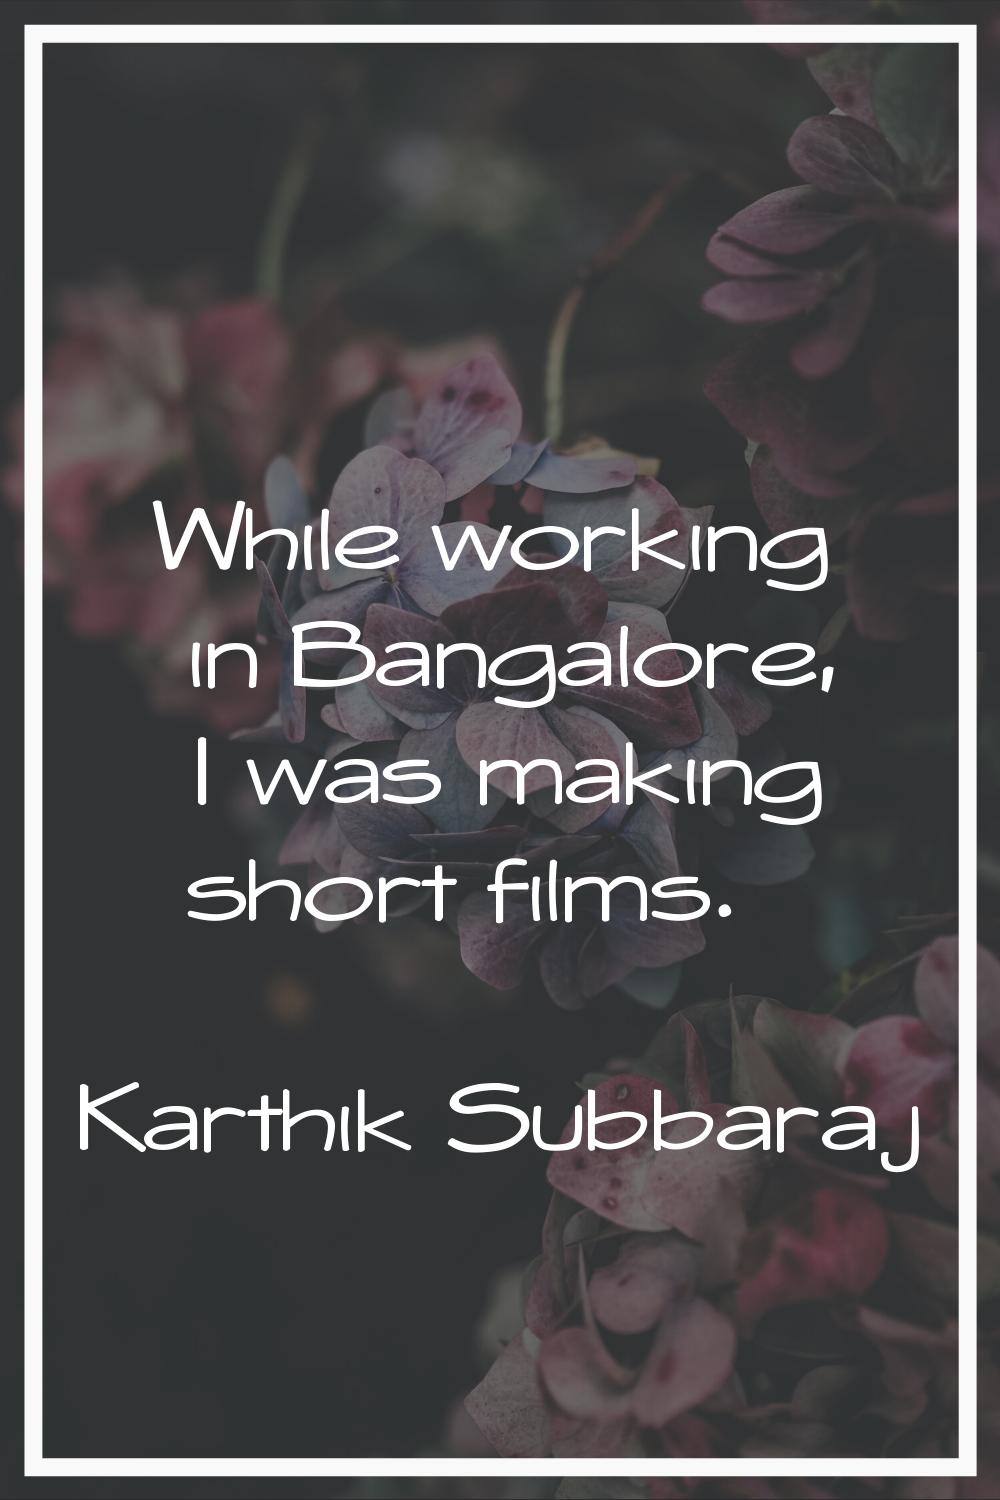 While working in Bangalore, I was making short films.